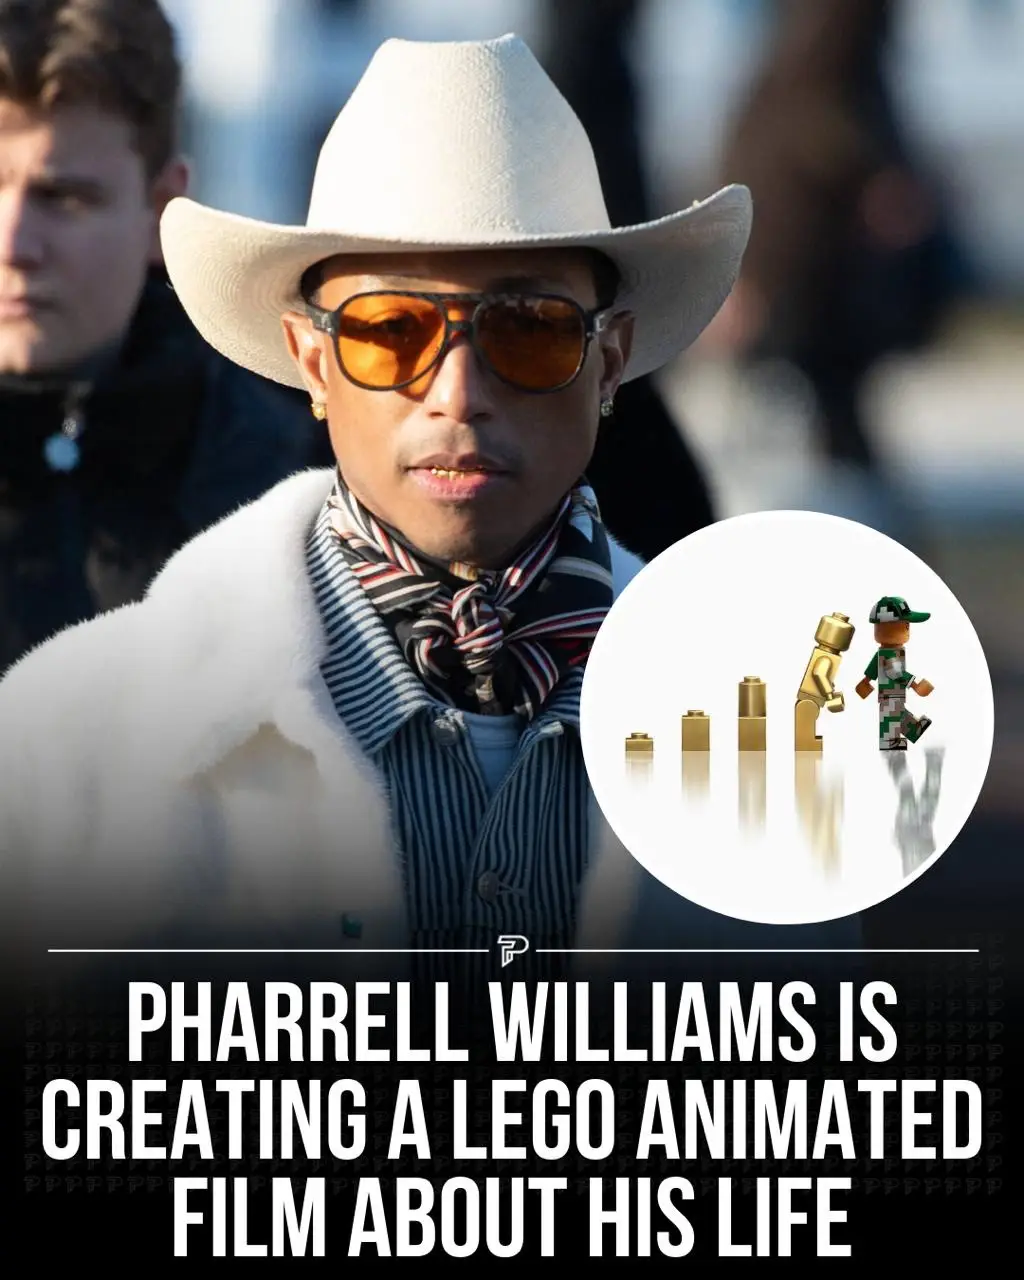 Pharrell Williams has announced a collaboration with The Lego Group for an unconventional film about his life, titled “Piece by Piece.” 🧱🎬 The 50-year-old musician, known for hits like “Happy” and “Blurred Lines,” is working with director Morgan Neville, renowned for documentaries like “Roadrunner” and “Won’t You Be My Neighbor?” The film aims to tell Pharrell’s story in a unique way, defying genres and expectations by transporting audiences into a Lego world where anything is possible. Williams expressed gratitude for the collaboration, highlighting the partnership with Neville and the opportunity to share his story through Lego bricks. The film is titled “Piece by Piece” and is expected to offer a fresh perspective on Pharrell’s life. Since you have read this far, you might as well check out our profile @Pubity as we post stuff like this all the time! ❤️ #Pubity #pharrellwilliams 